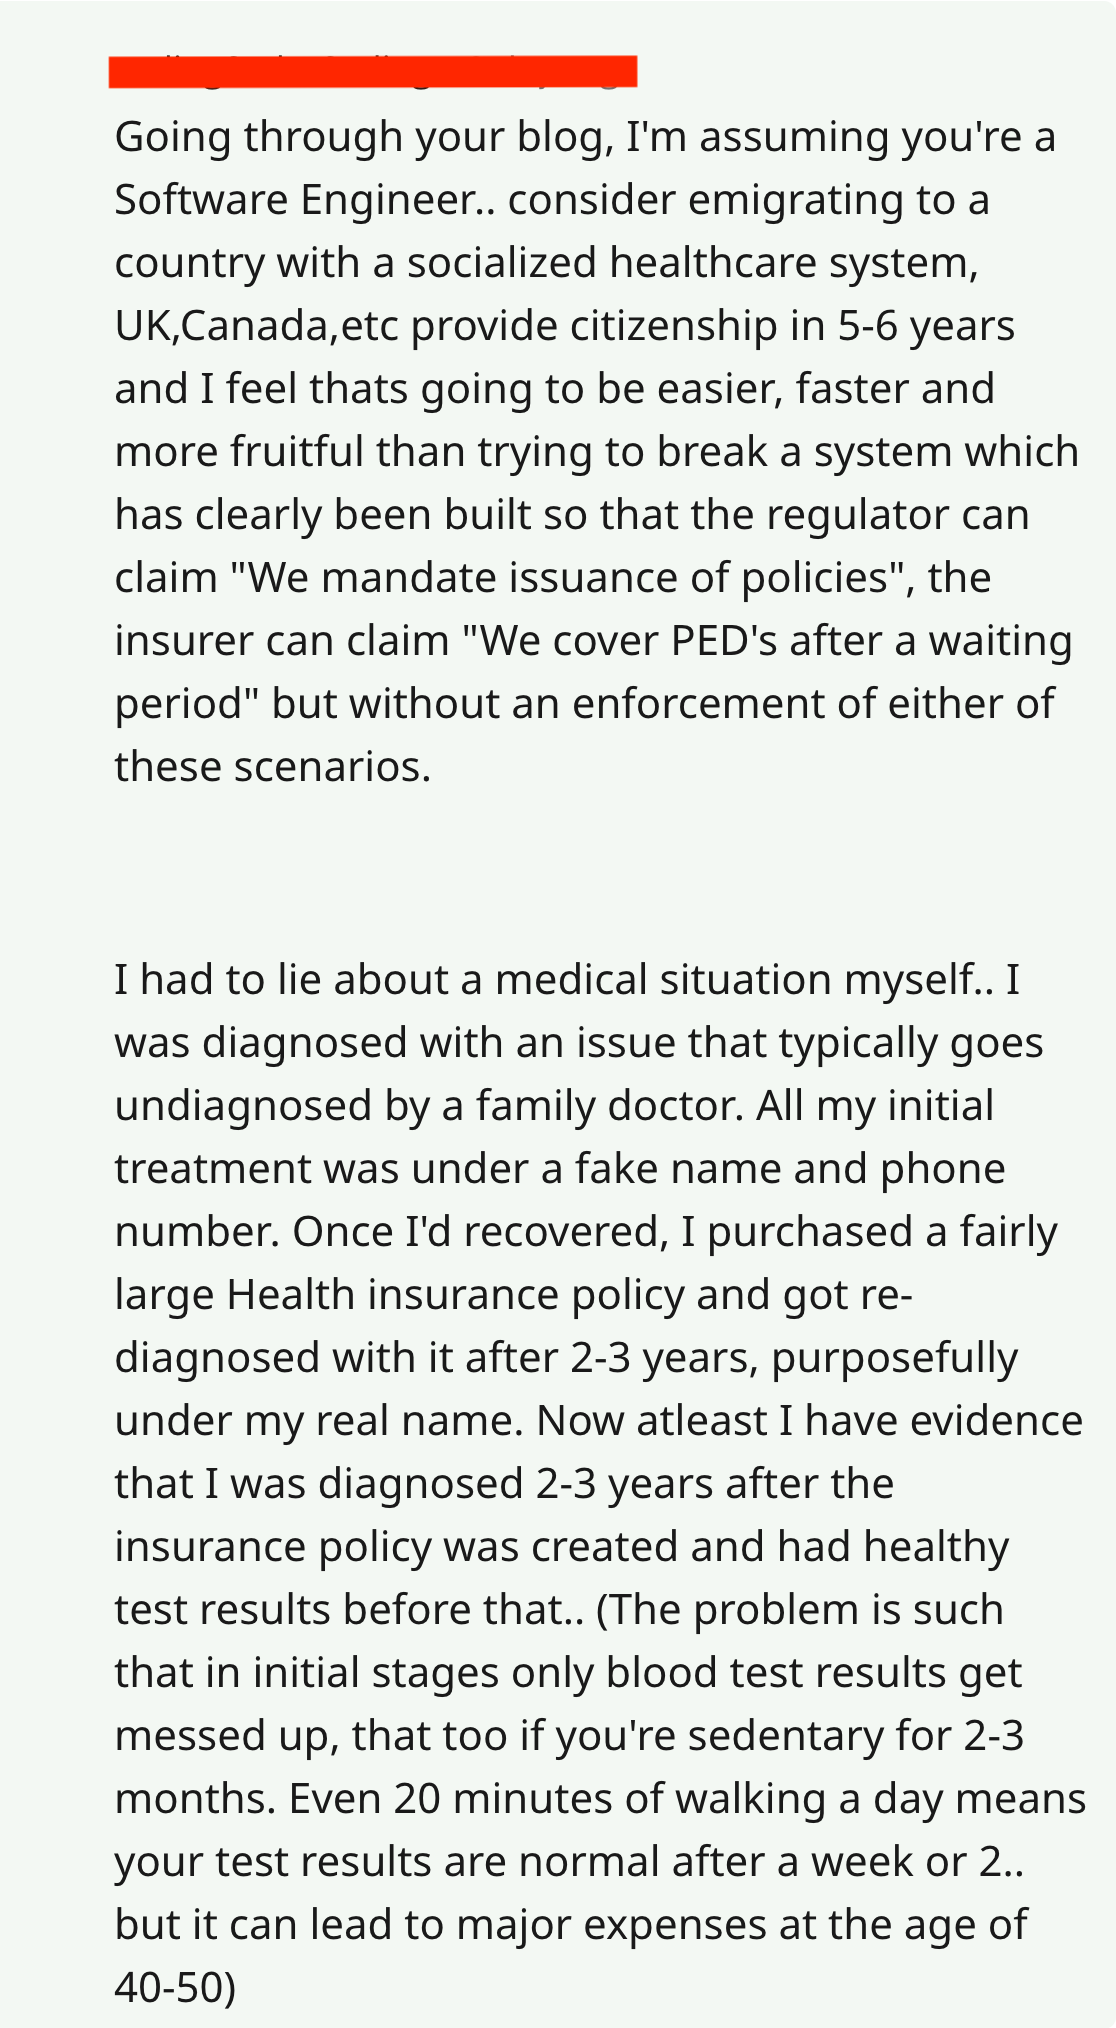 Lying about preexisting illness to the insurer-1